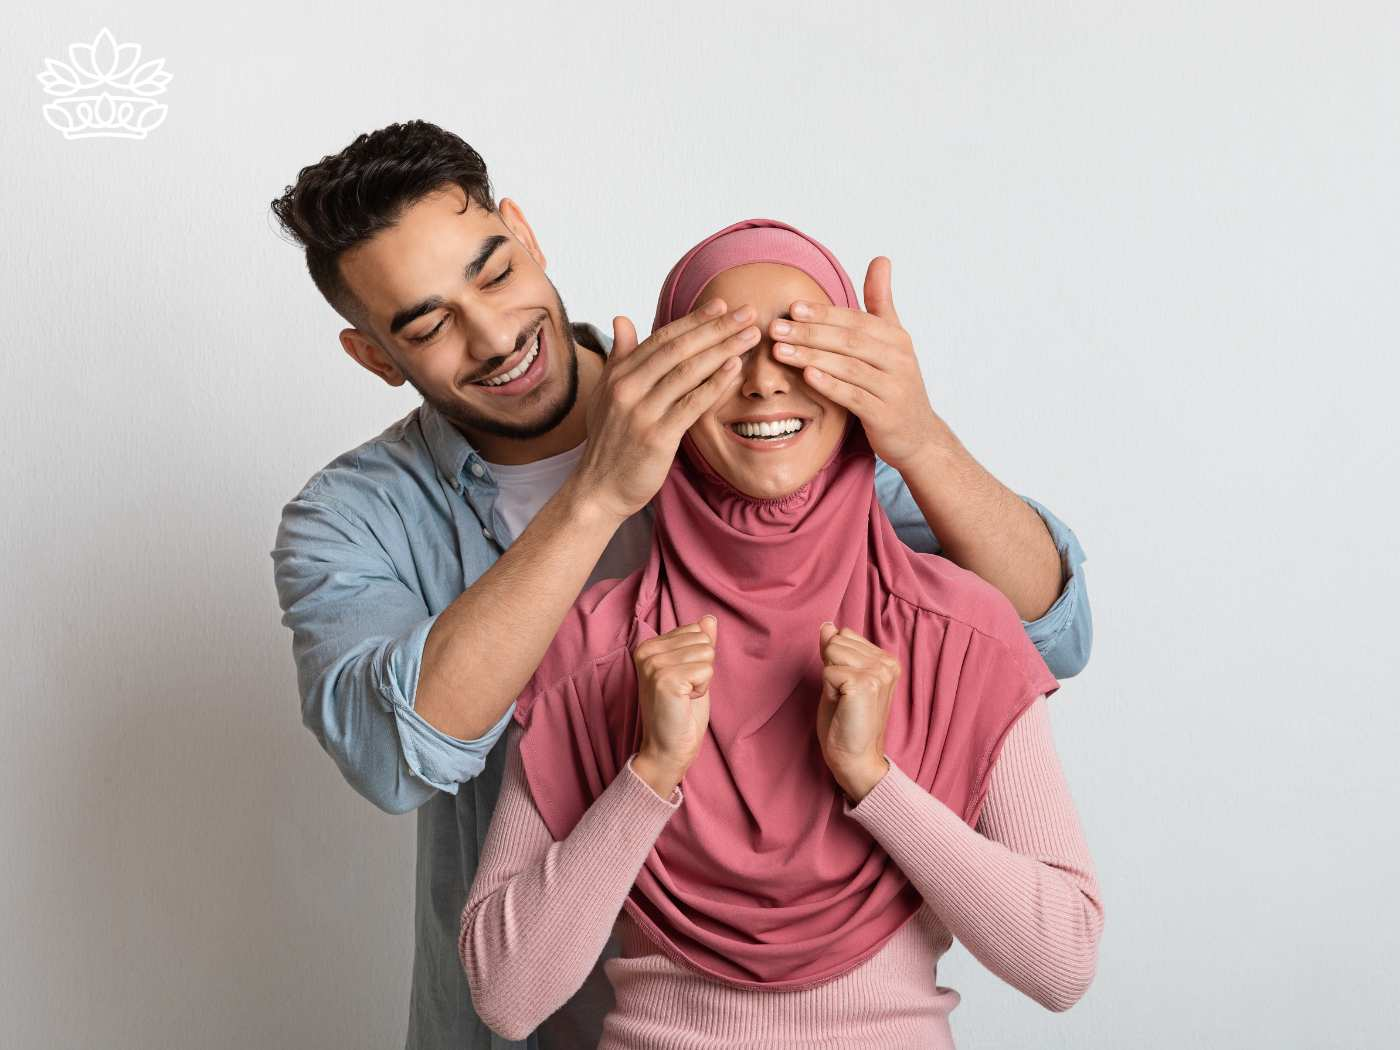 A cheerful man covering the eyes of a smiling woman wearing a pink hijab from behind in a playful gesture of surprise against a light background. Both exhibit expressions of joy and excitement, perfect for special occasions with Fabulous Flowers and Gifts. Gift Boxes for wife. Delivered with Heart.